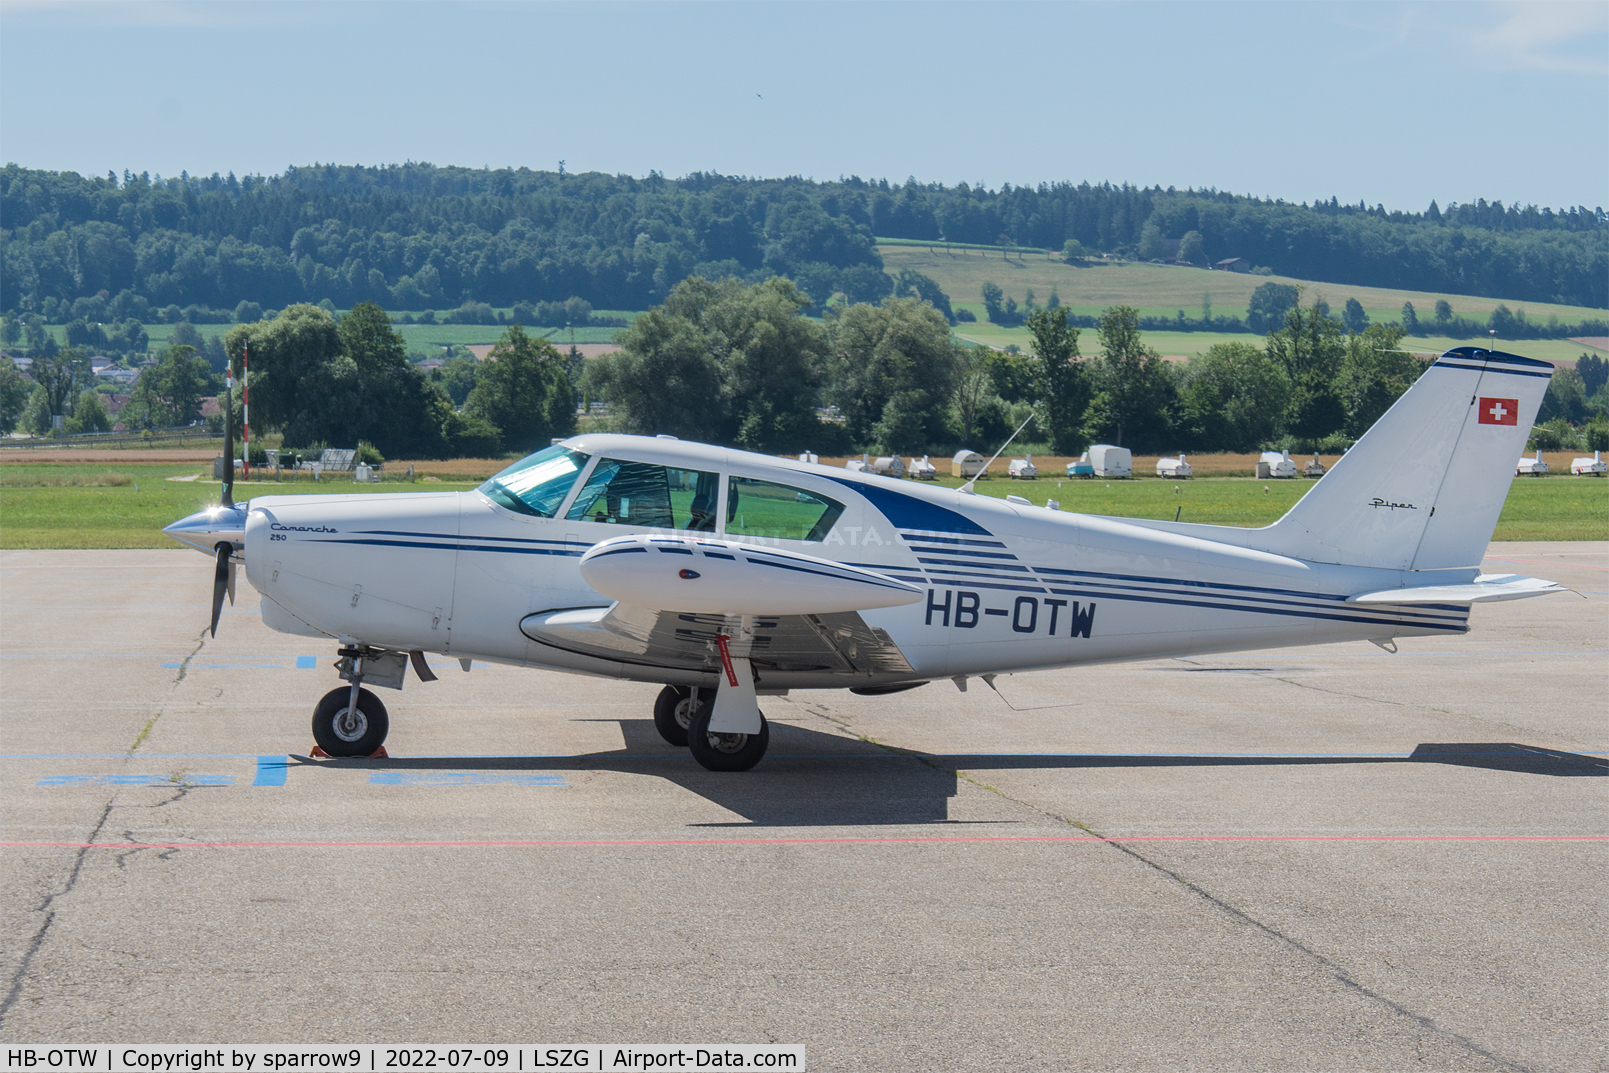 HB-OTW, 1961 Piper PA-24-250 Comanche C/N 24-2643, At Grenchen. HB-registered since 1961-04-26.